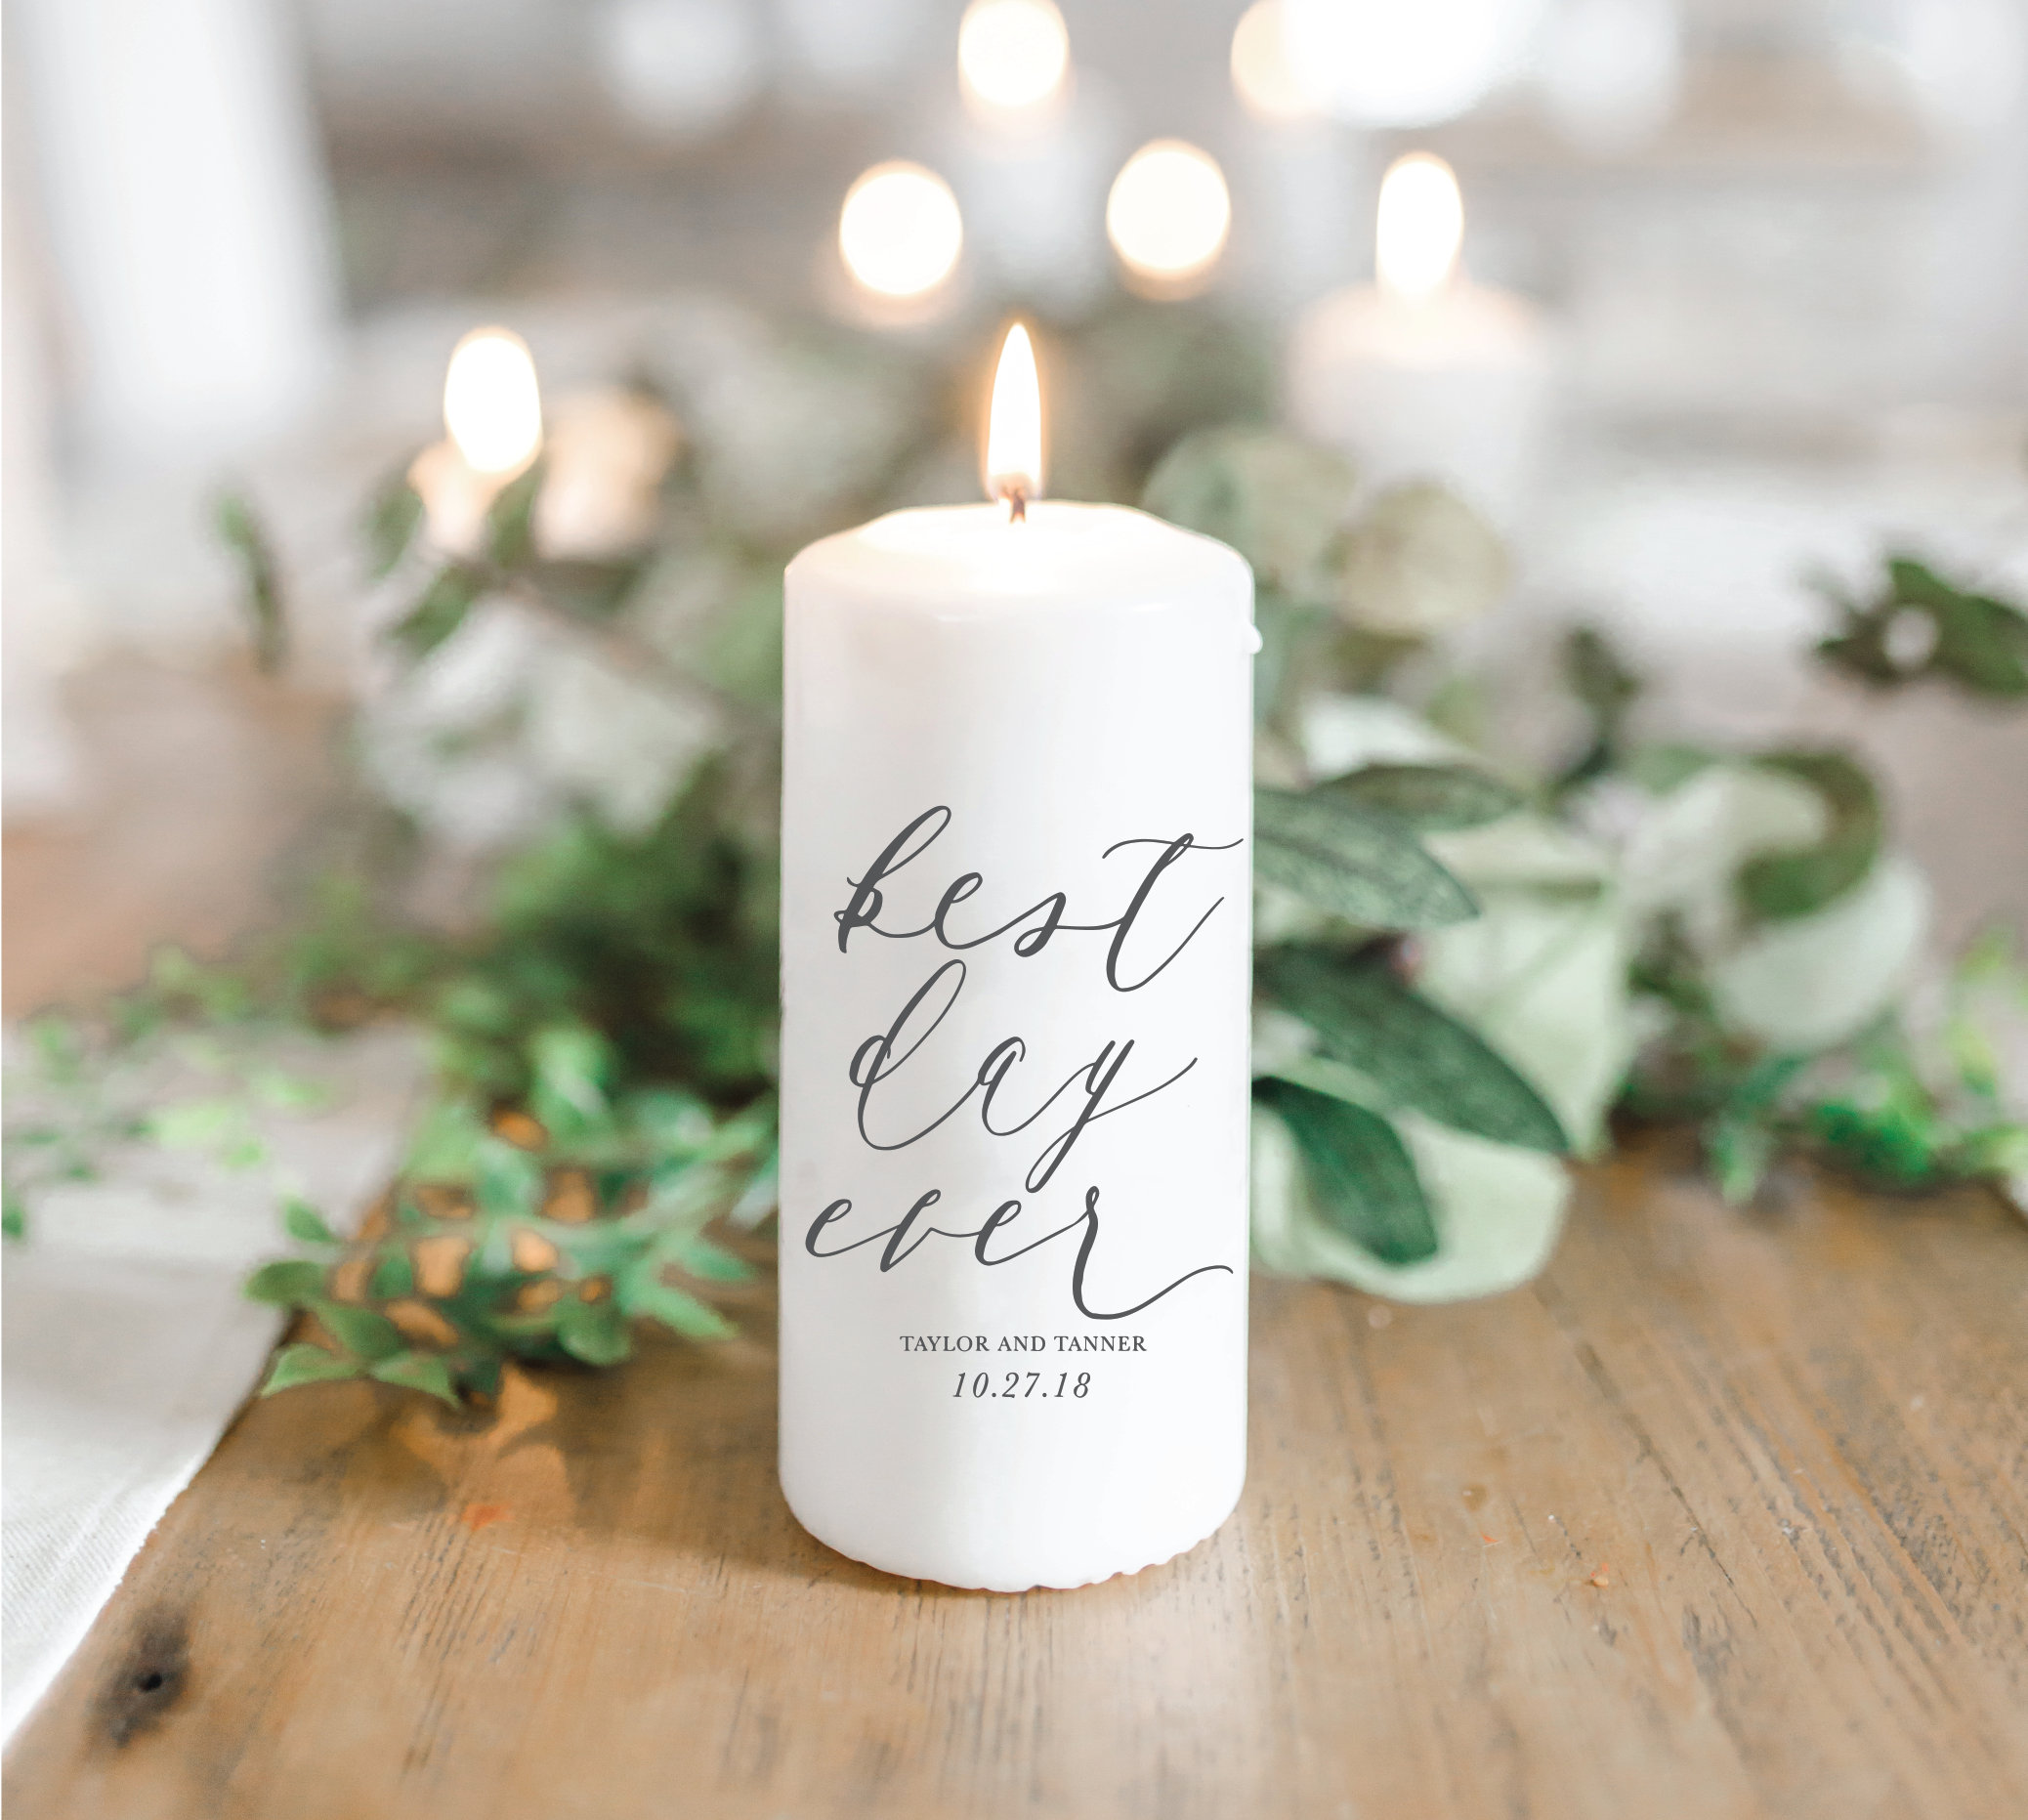 Candle Personalized Best Day Ever Wedding Favor Newlywed - Etsy